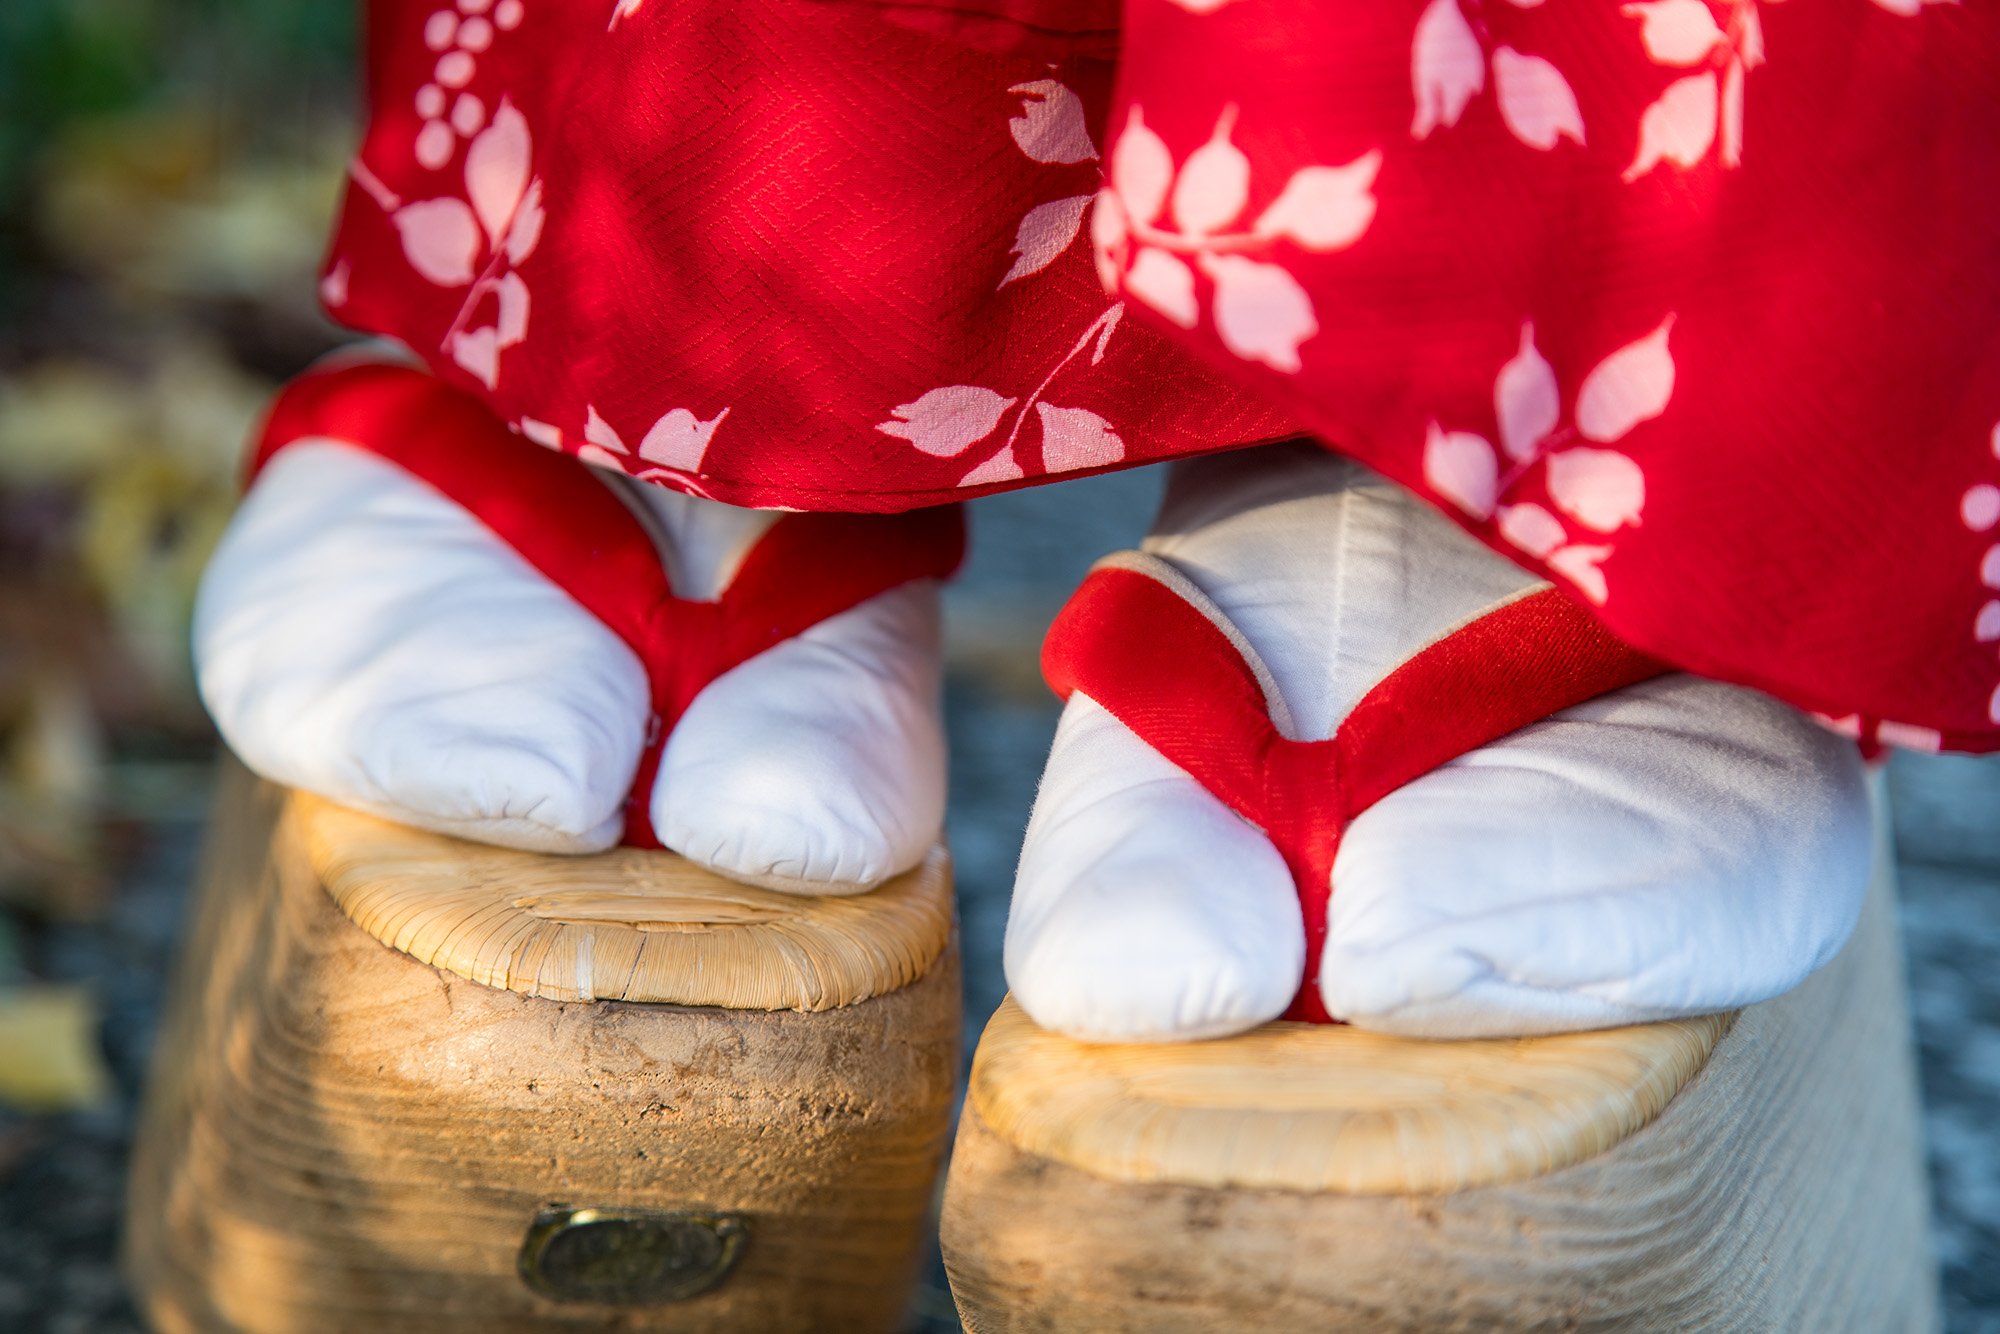 In this close-up image, we focus on the intricate details of a geisha's traditional attire. The wooden sandals, carefully crafted...